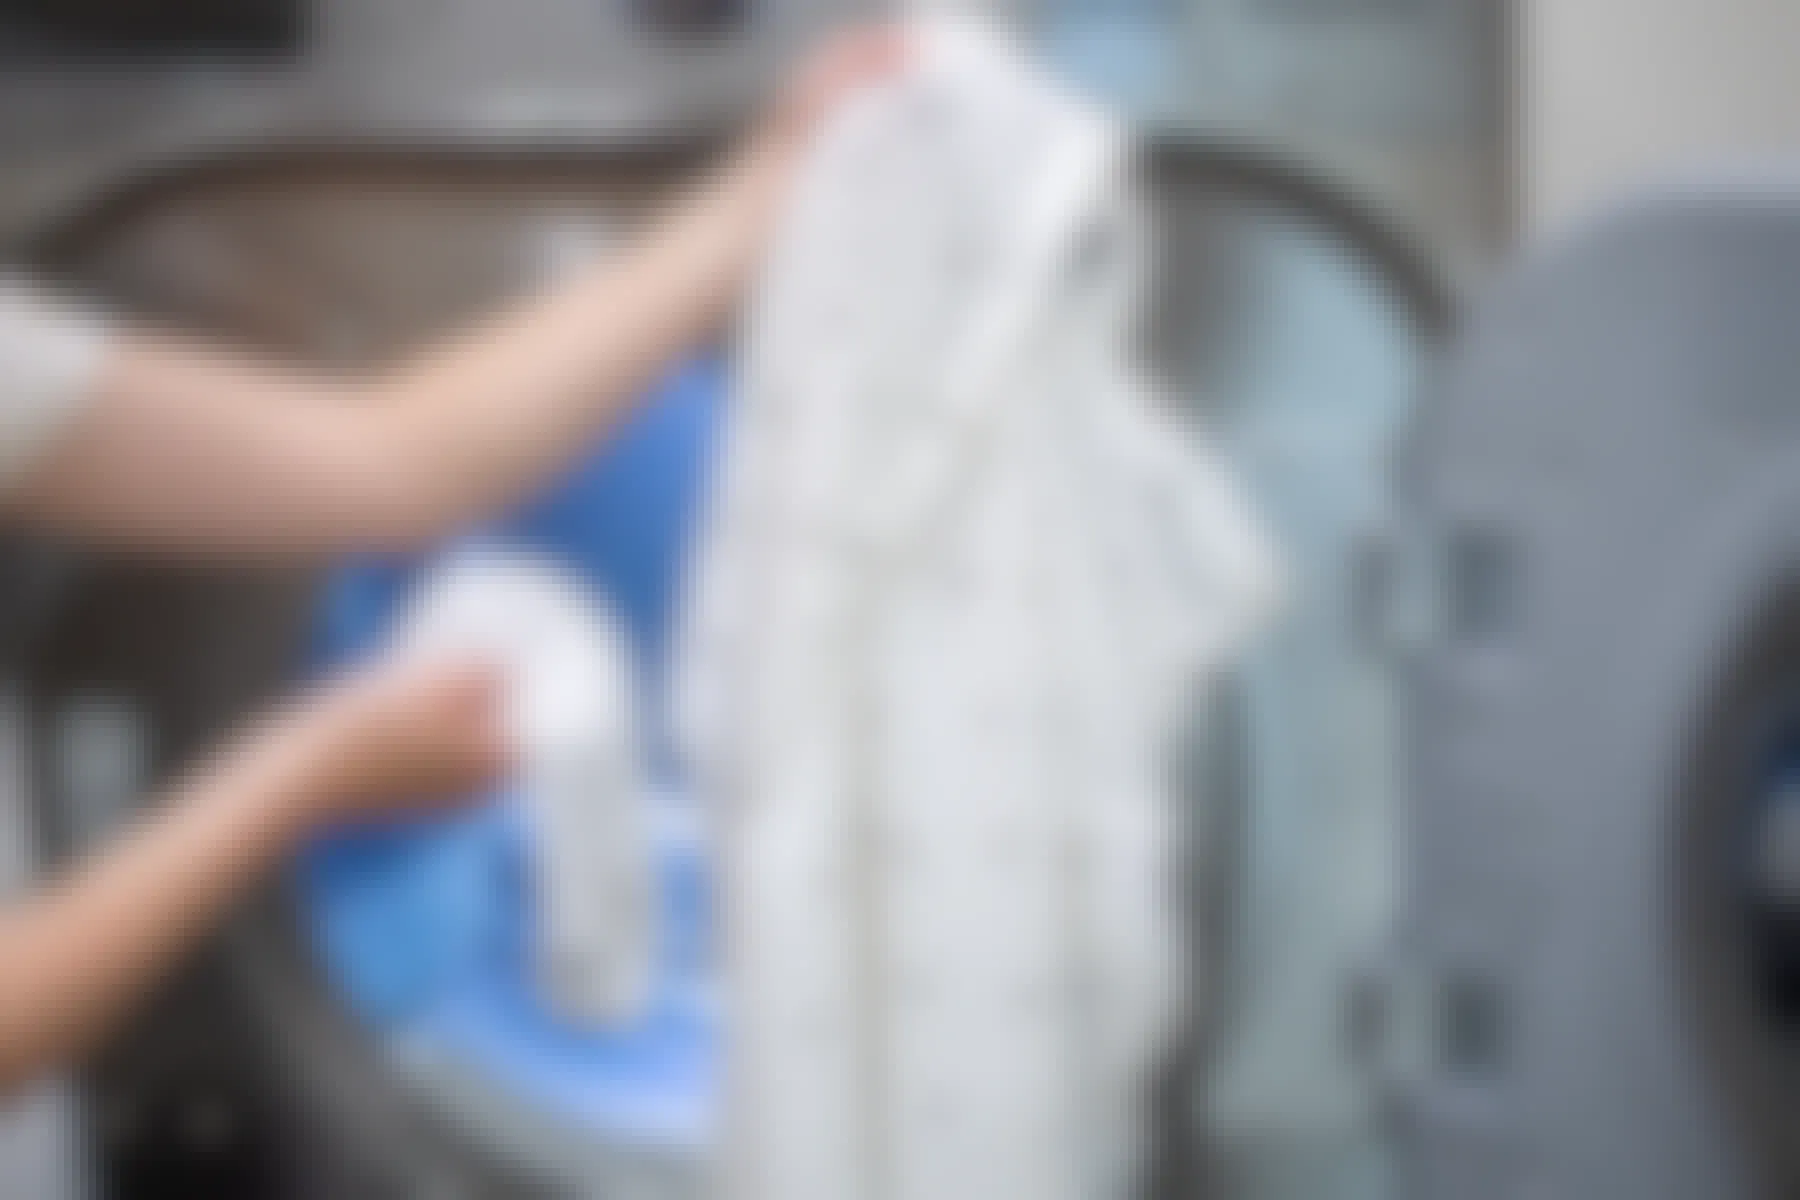 Woman holding a wet sock with a wrinkled shirt in front of a clothes dryer.